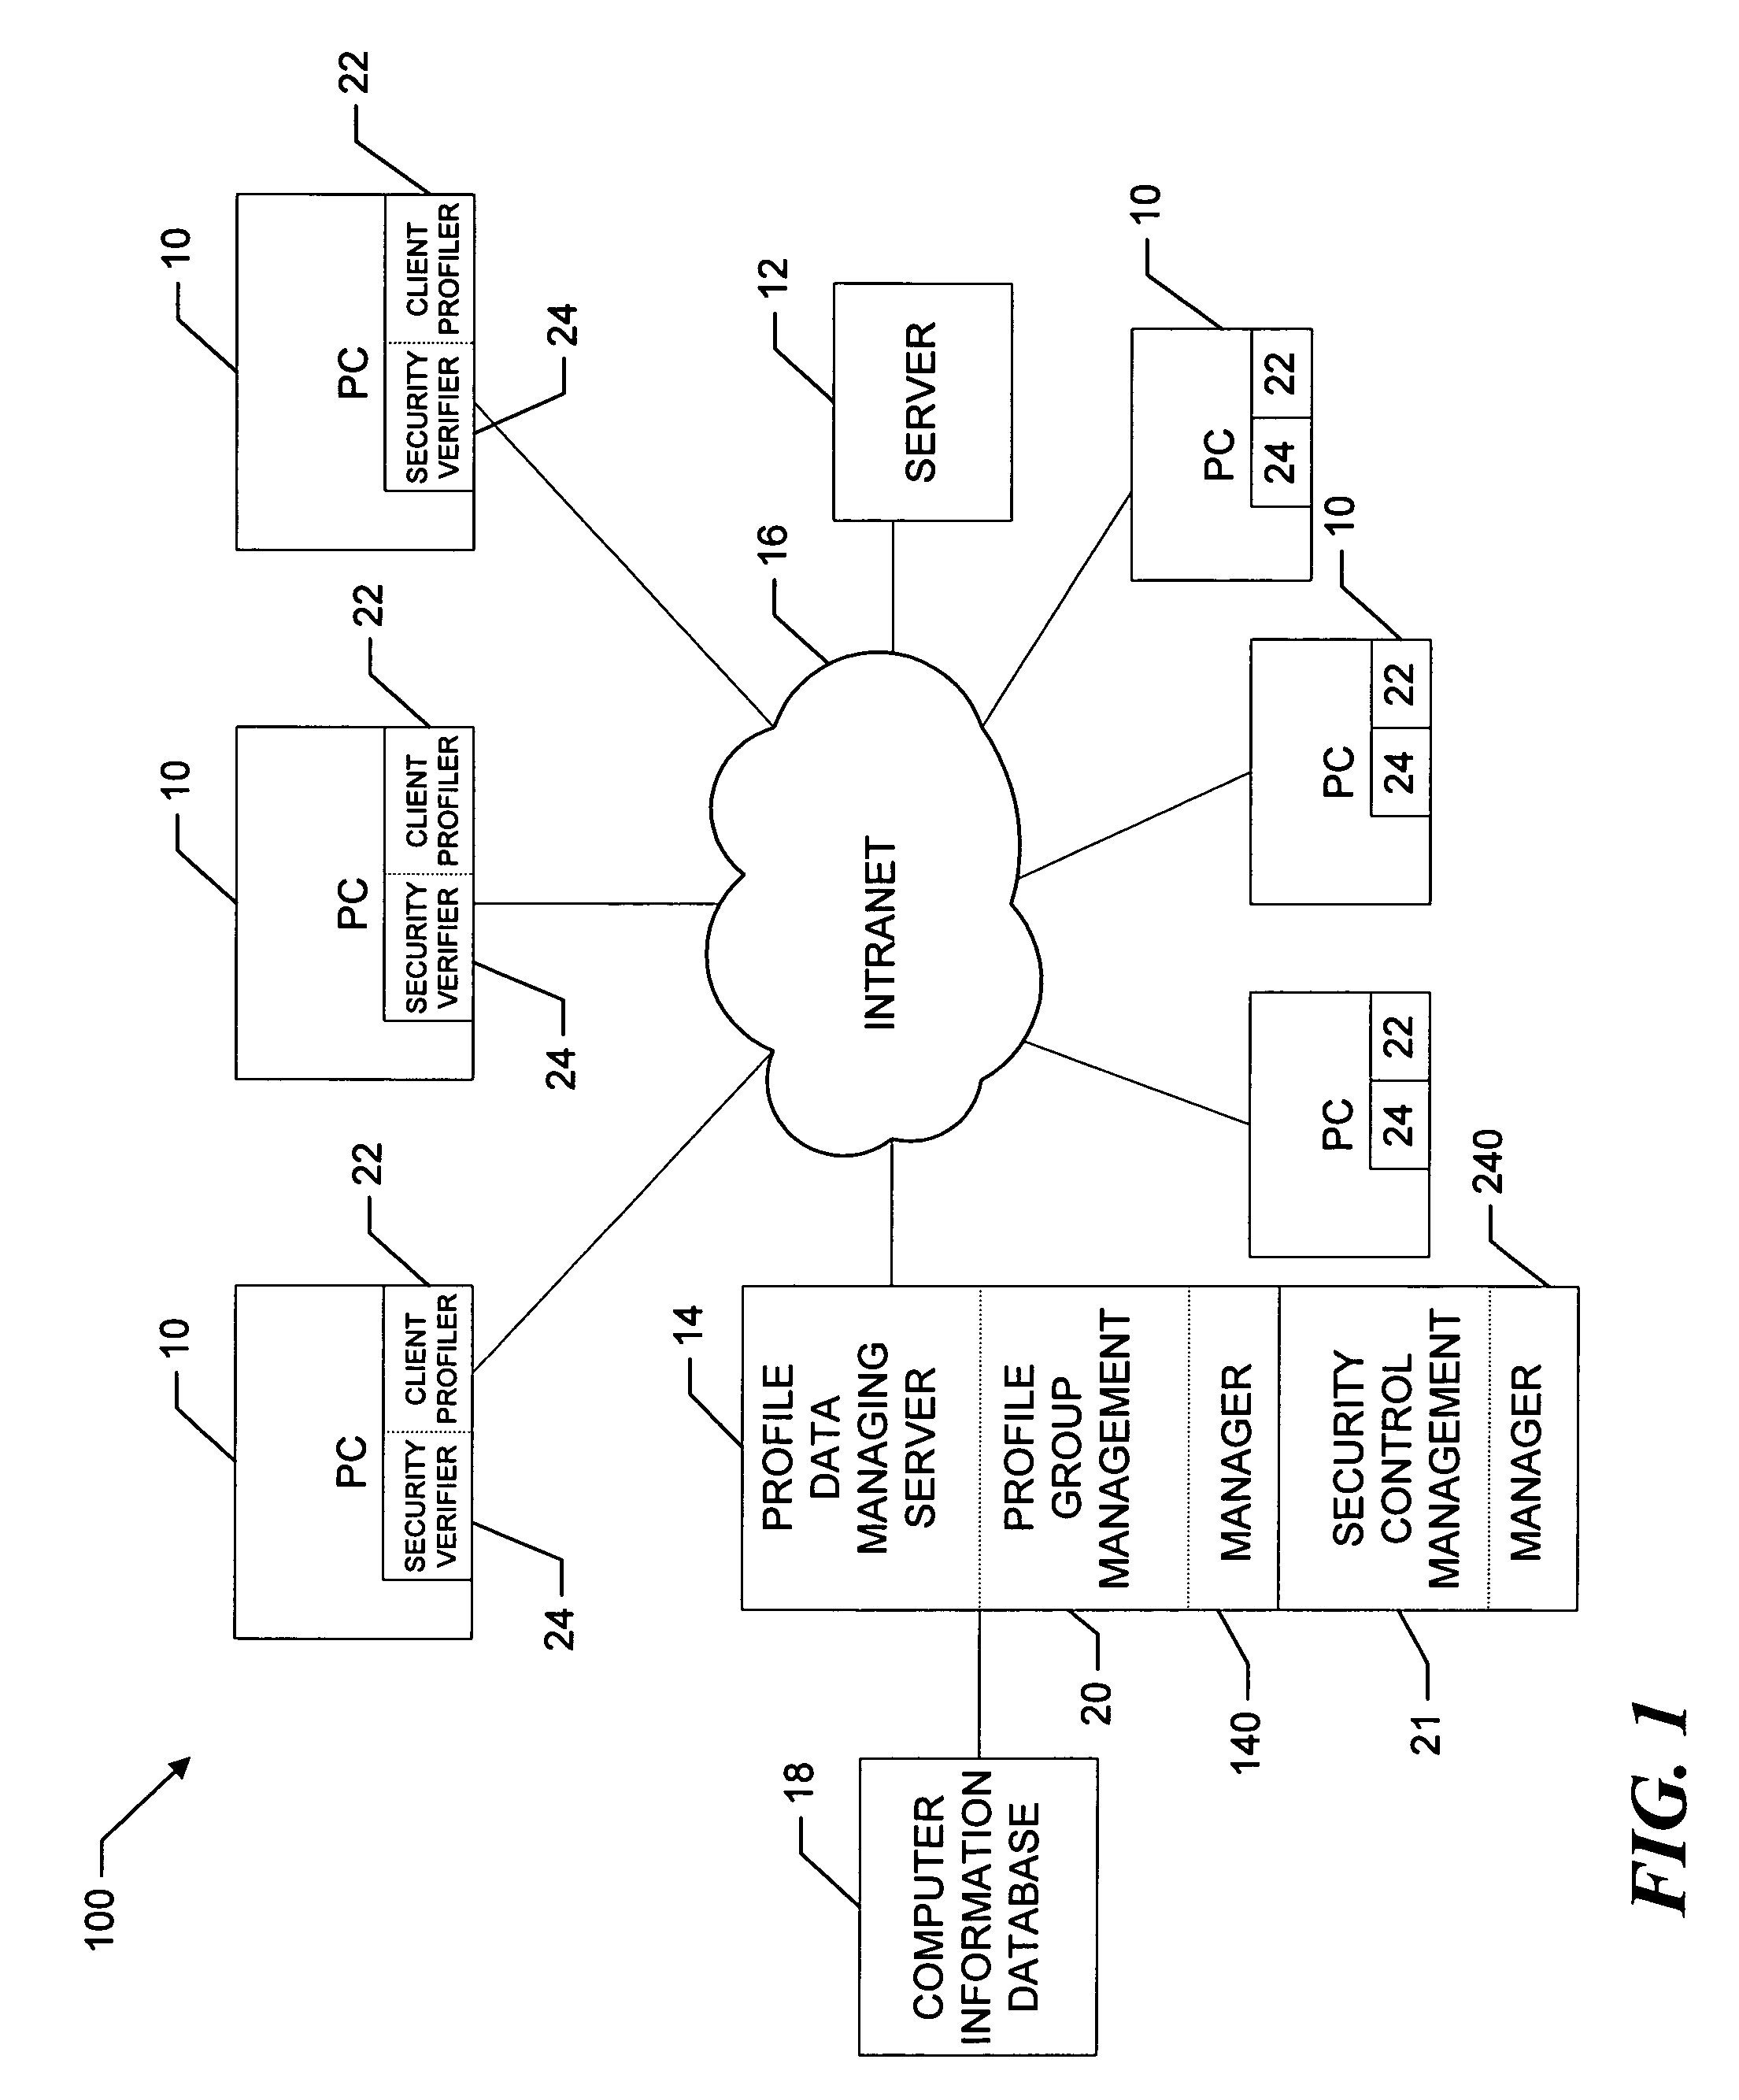 Security control verification and monitoring subsystem for use in a computer information database system